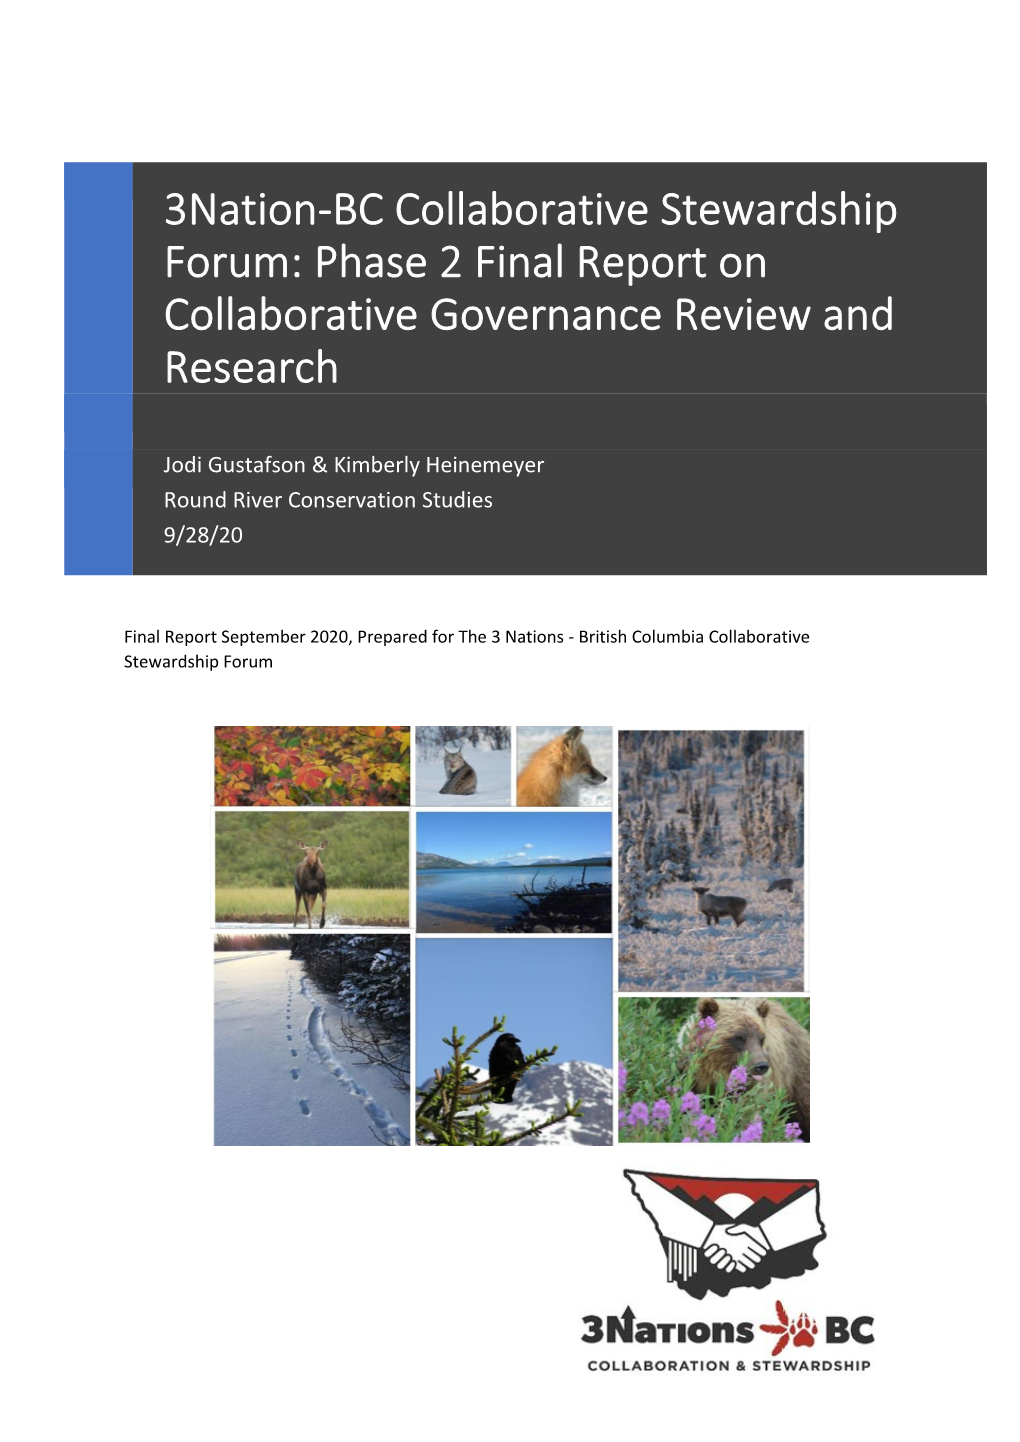 3Nation-BC Collaborative Stewardship Forum: Phase 2 Final Report On